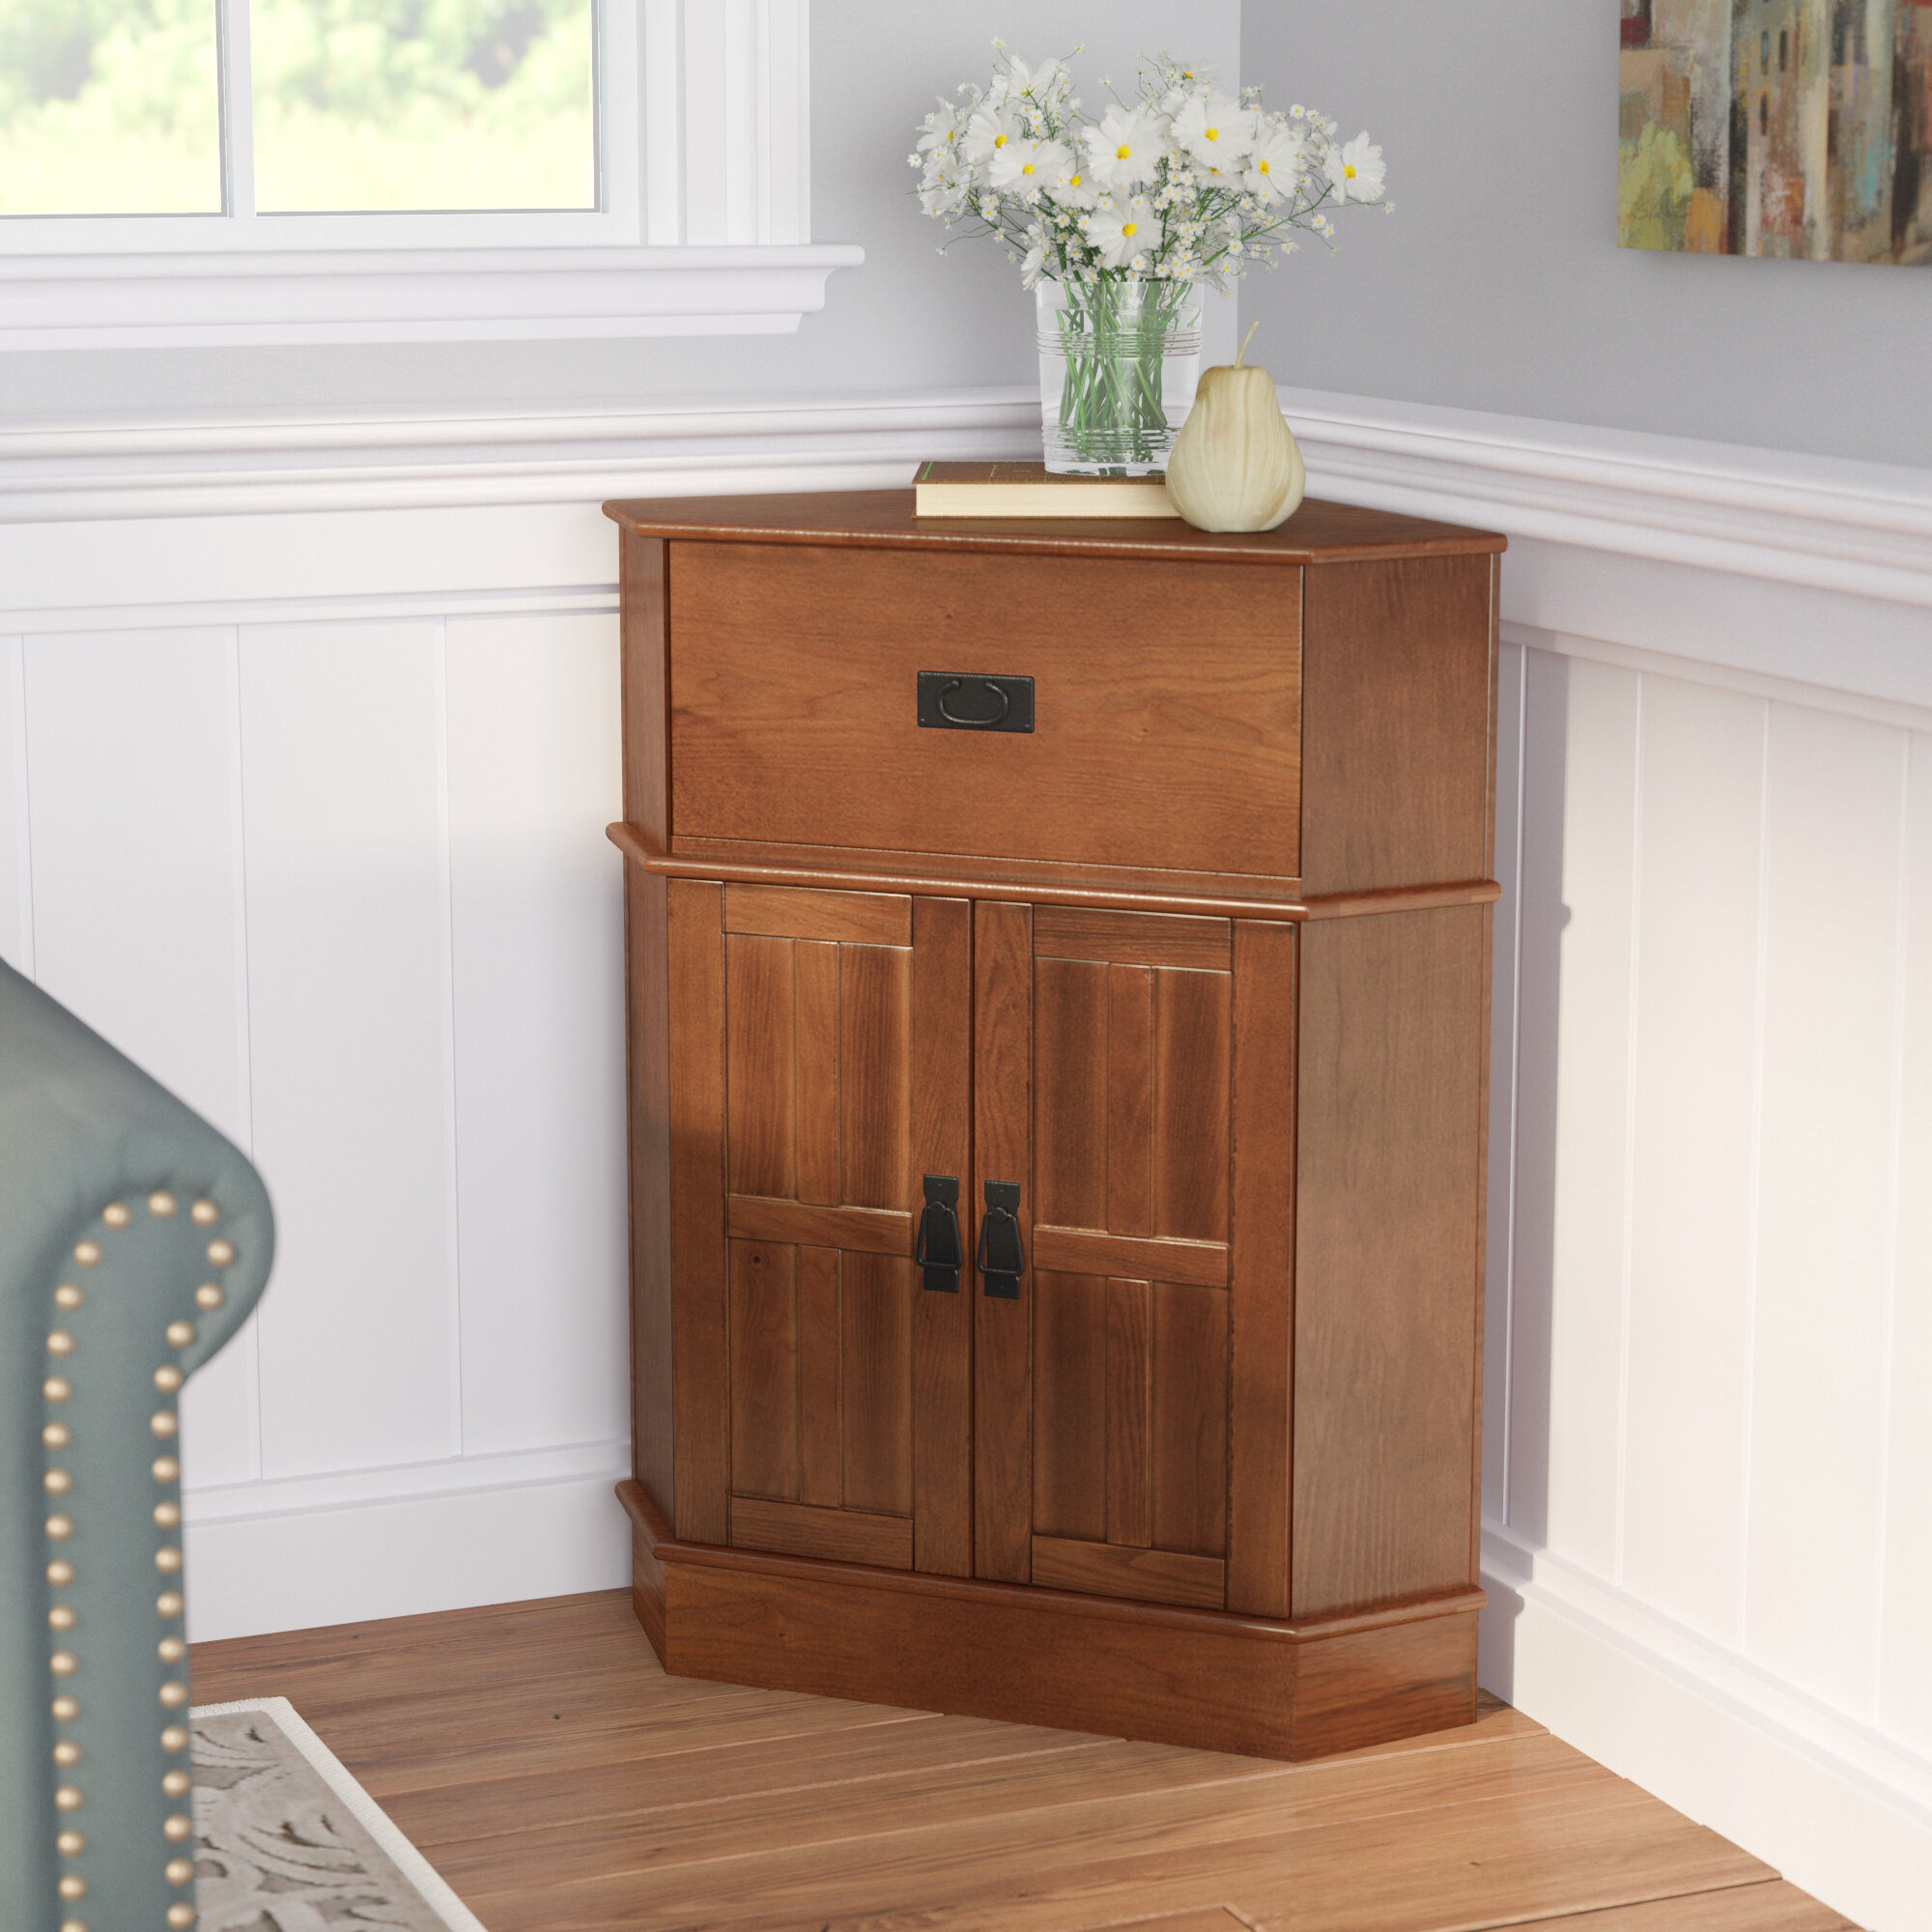 Charlton Home Gulley 2 Door Corner Accent Cabinet Reviews